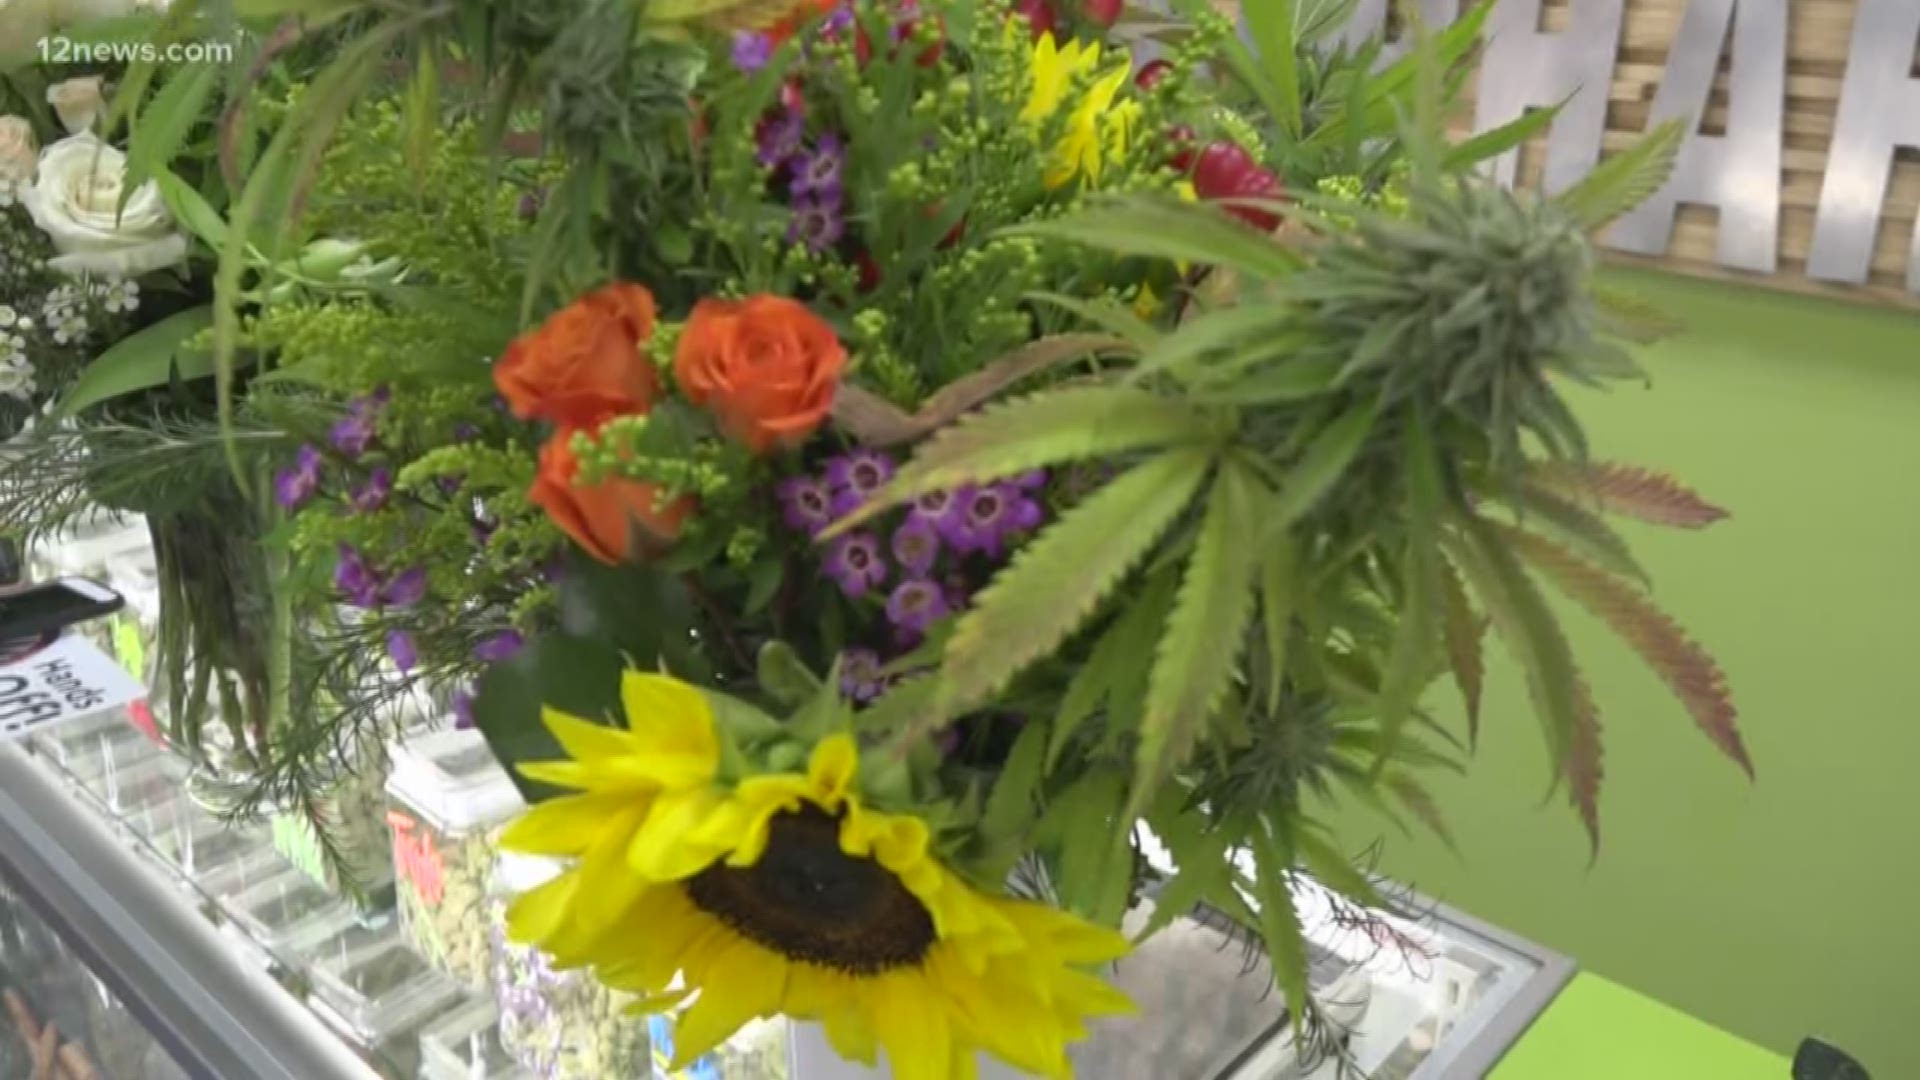 There's something blooming in the Valley when it comes to wedding planning. Cannabis plants are setting bridal bouquets ablaze.